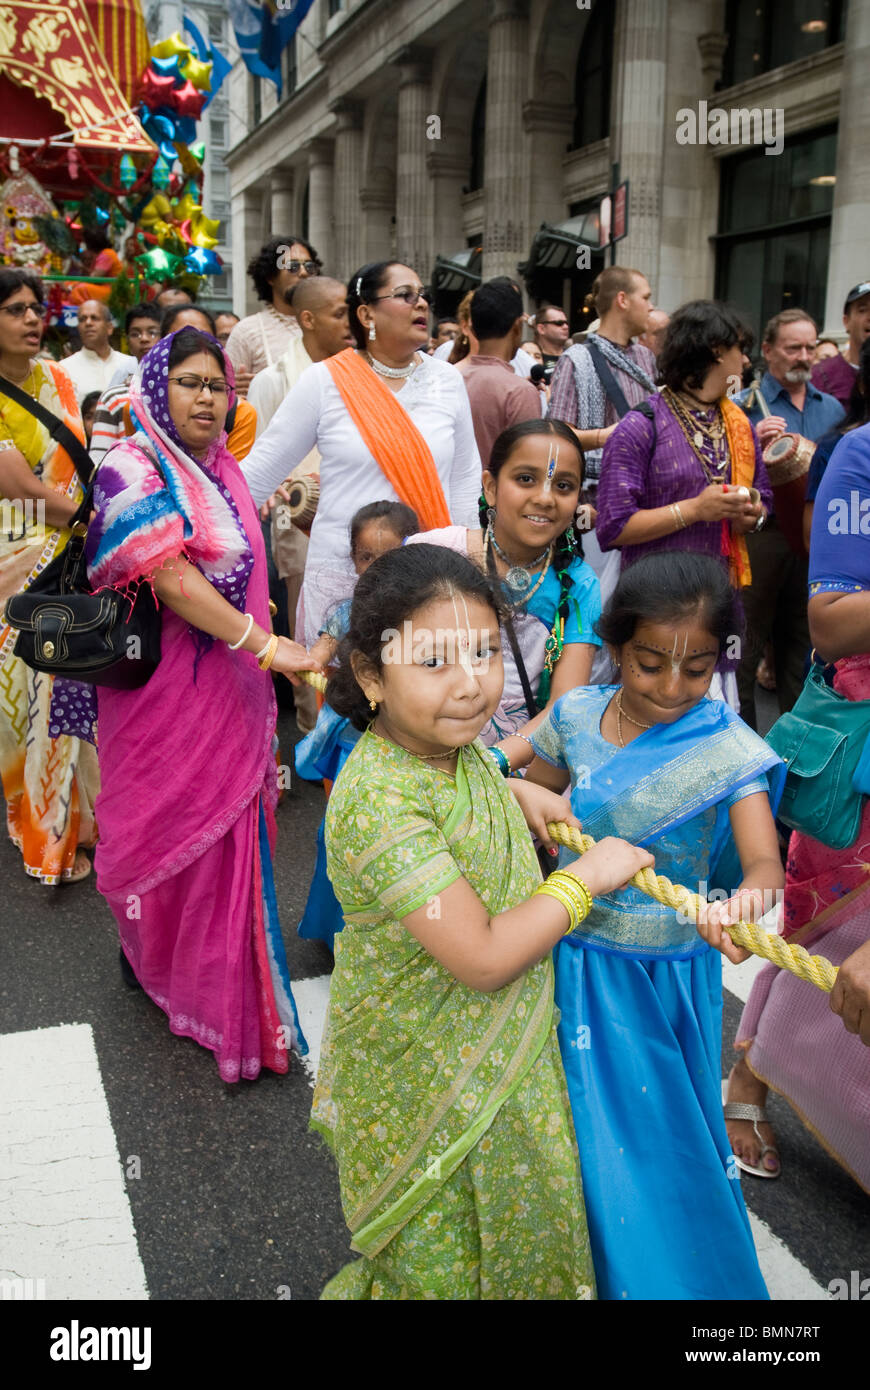 Hundreds of members of the Hare Krishna religion gather on Fifth Ave. in New York for their annual parade Stock Photo